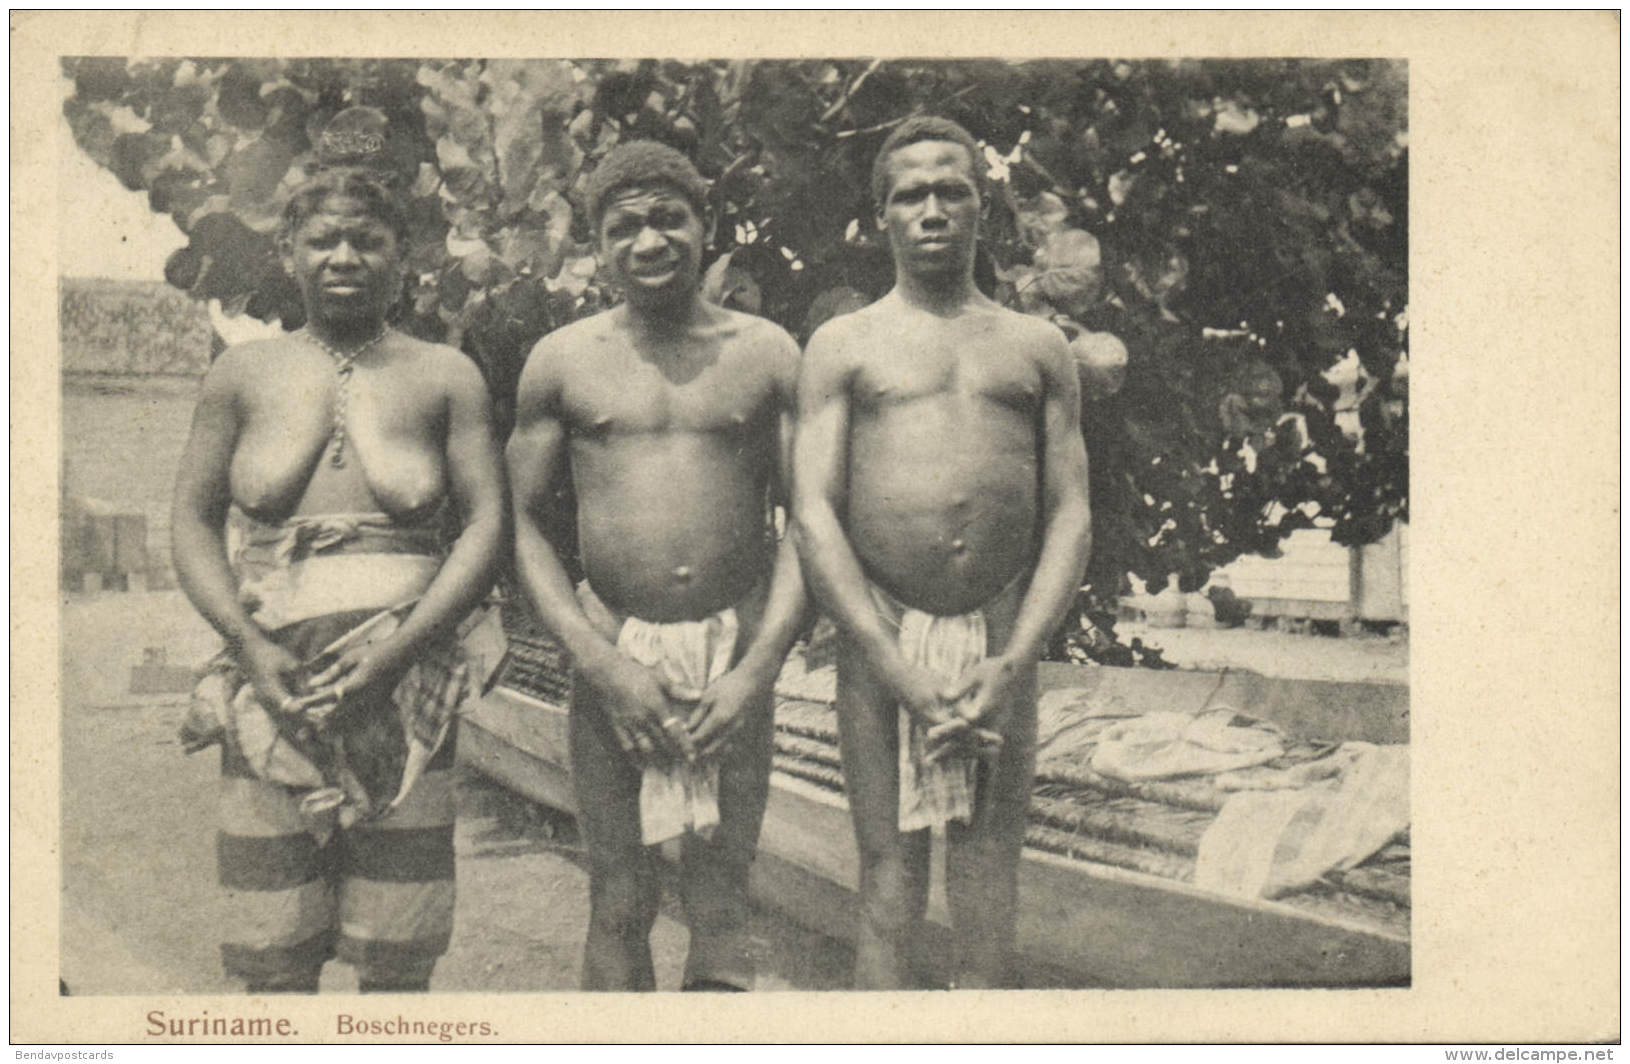 Nude Russian Natives